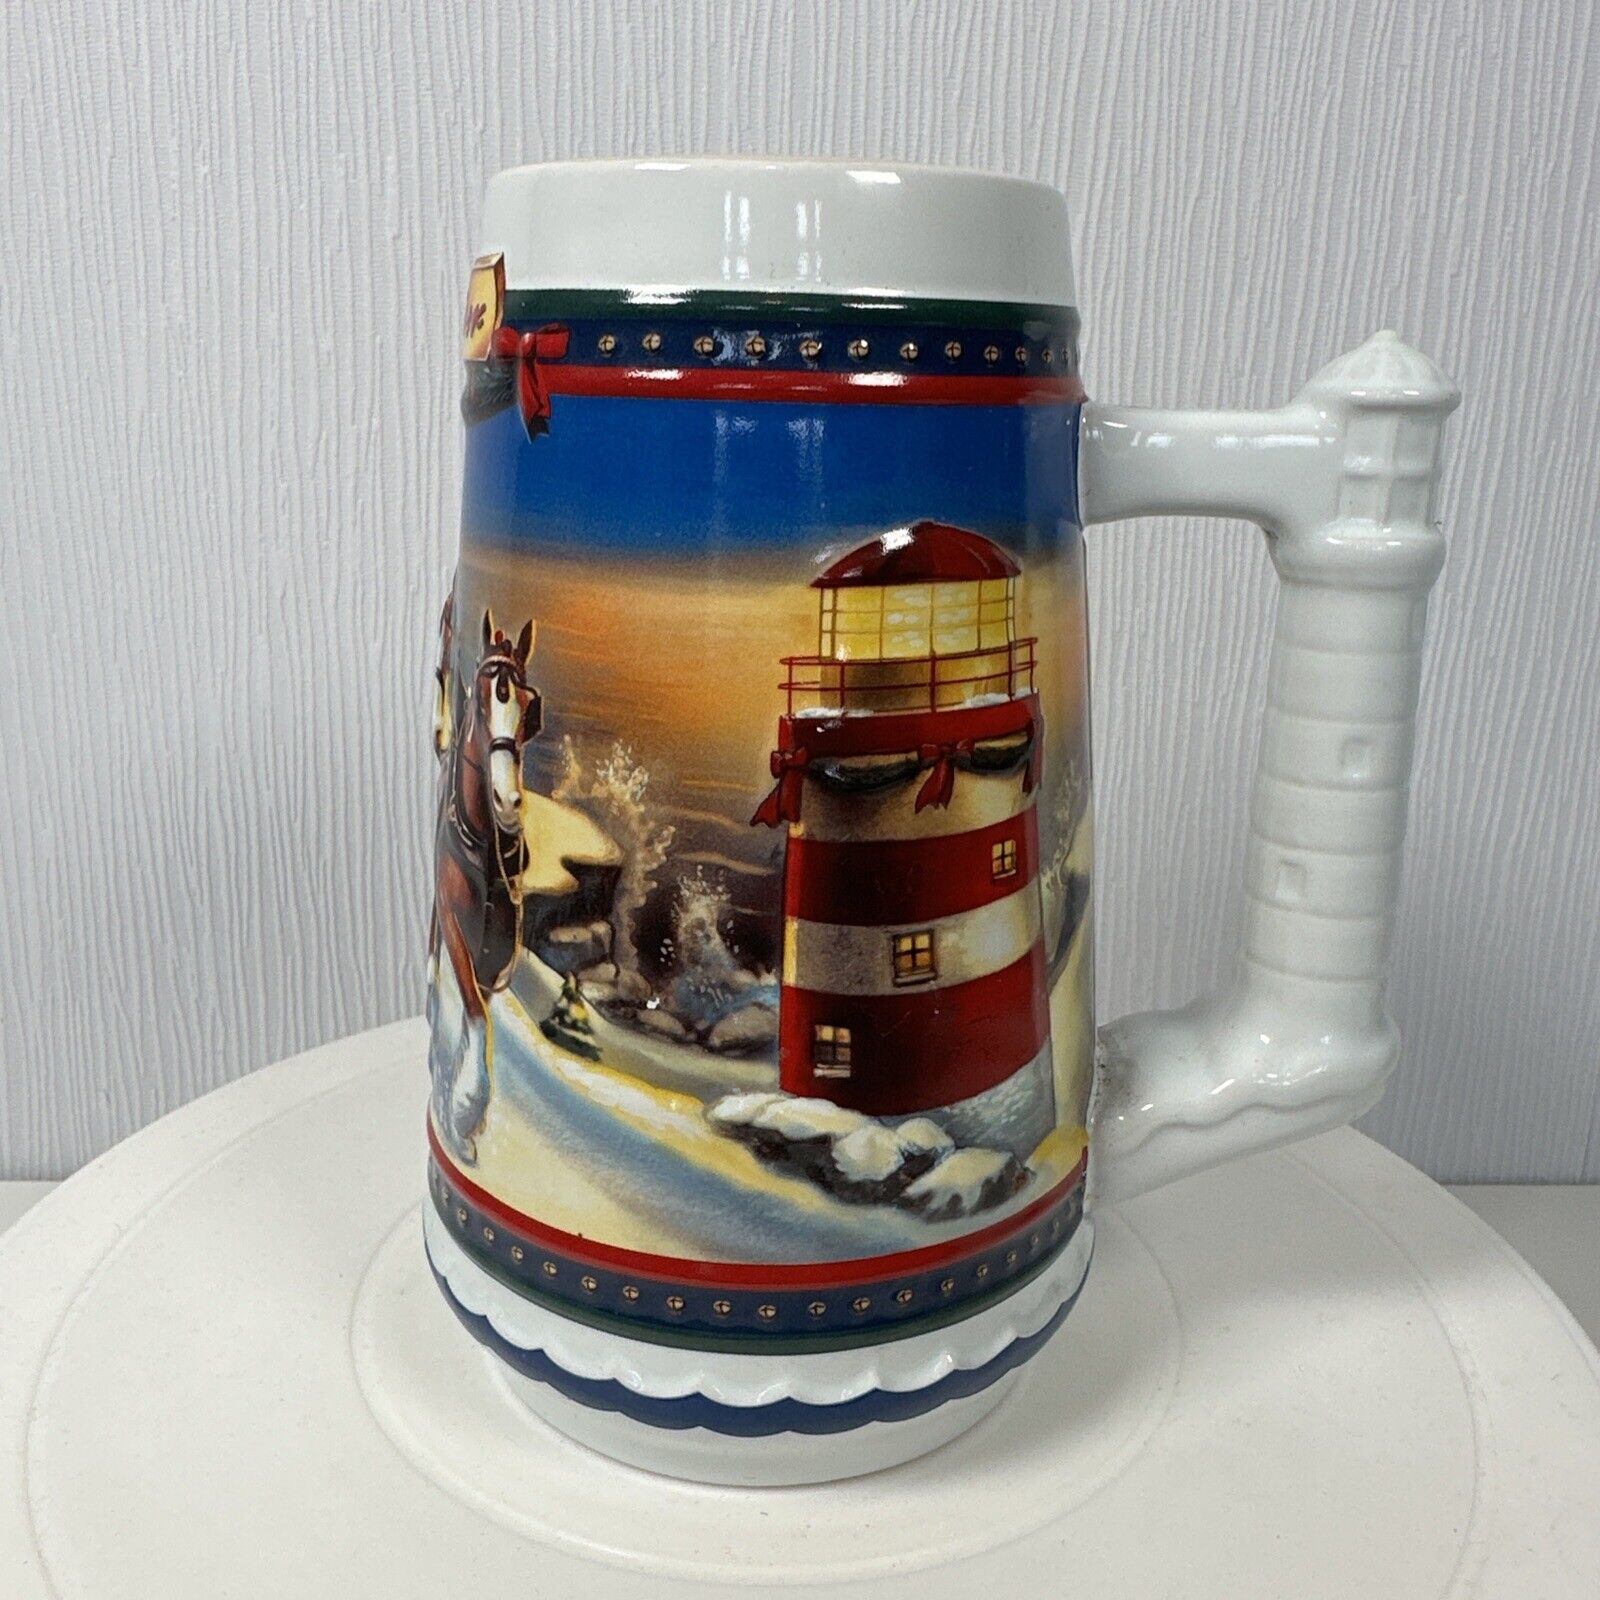 Budweiser Guiding The Way Home 7” Stein Lighthouse Christmas Vintage 2002